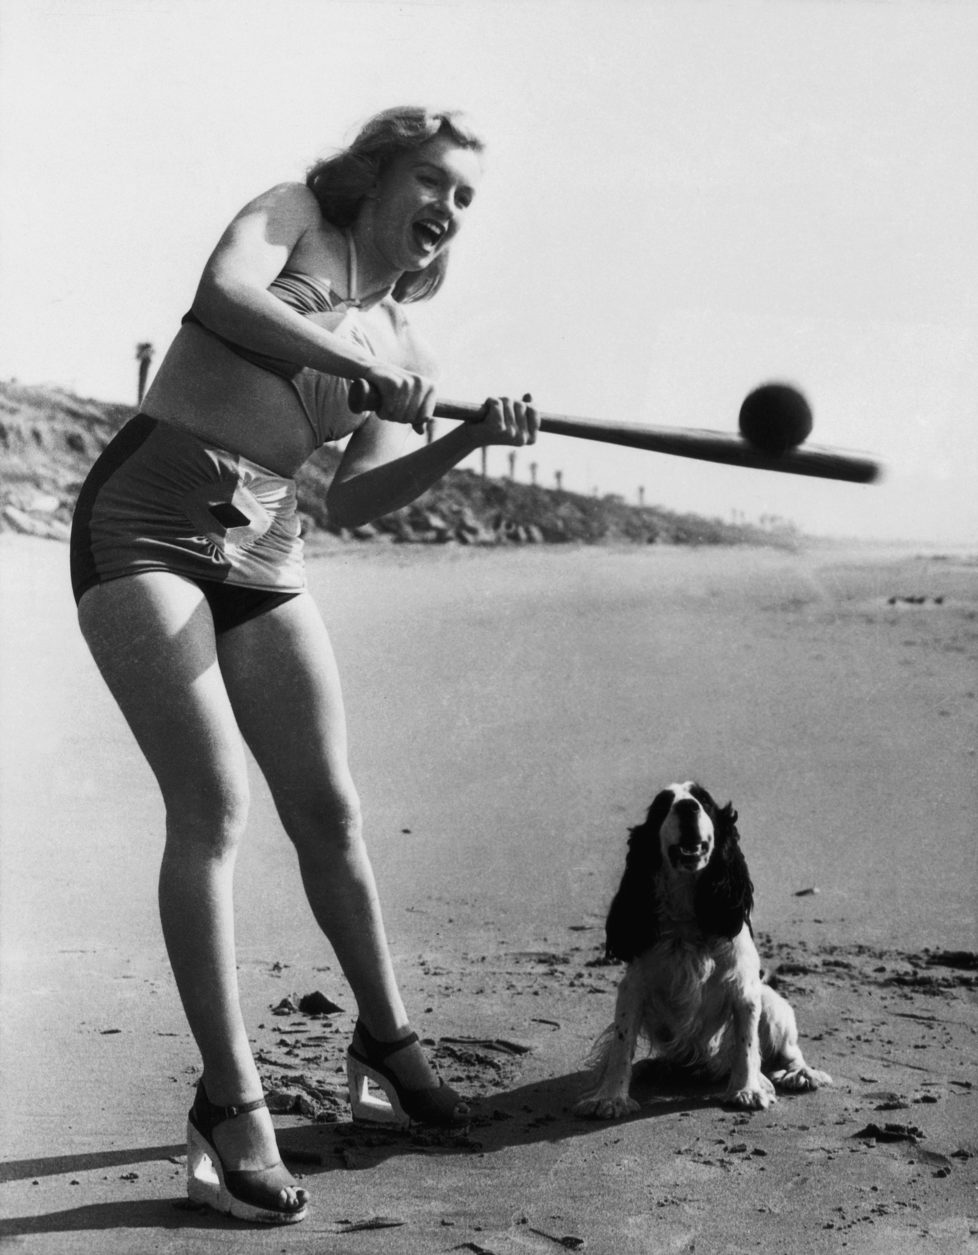 The American actress Marilyn Monroe playing softball in a bathing suit on a beach. USA, 1950s (Photo by Mondadori Portfolio via Getty Images)